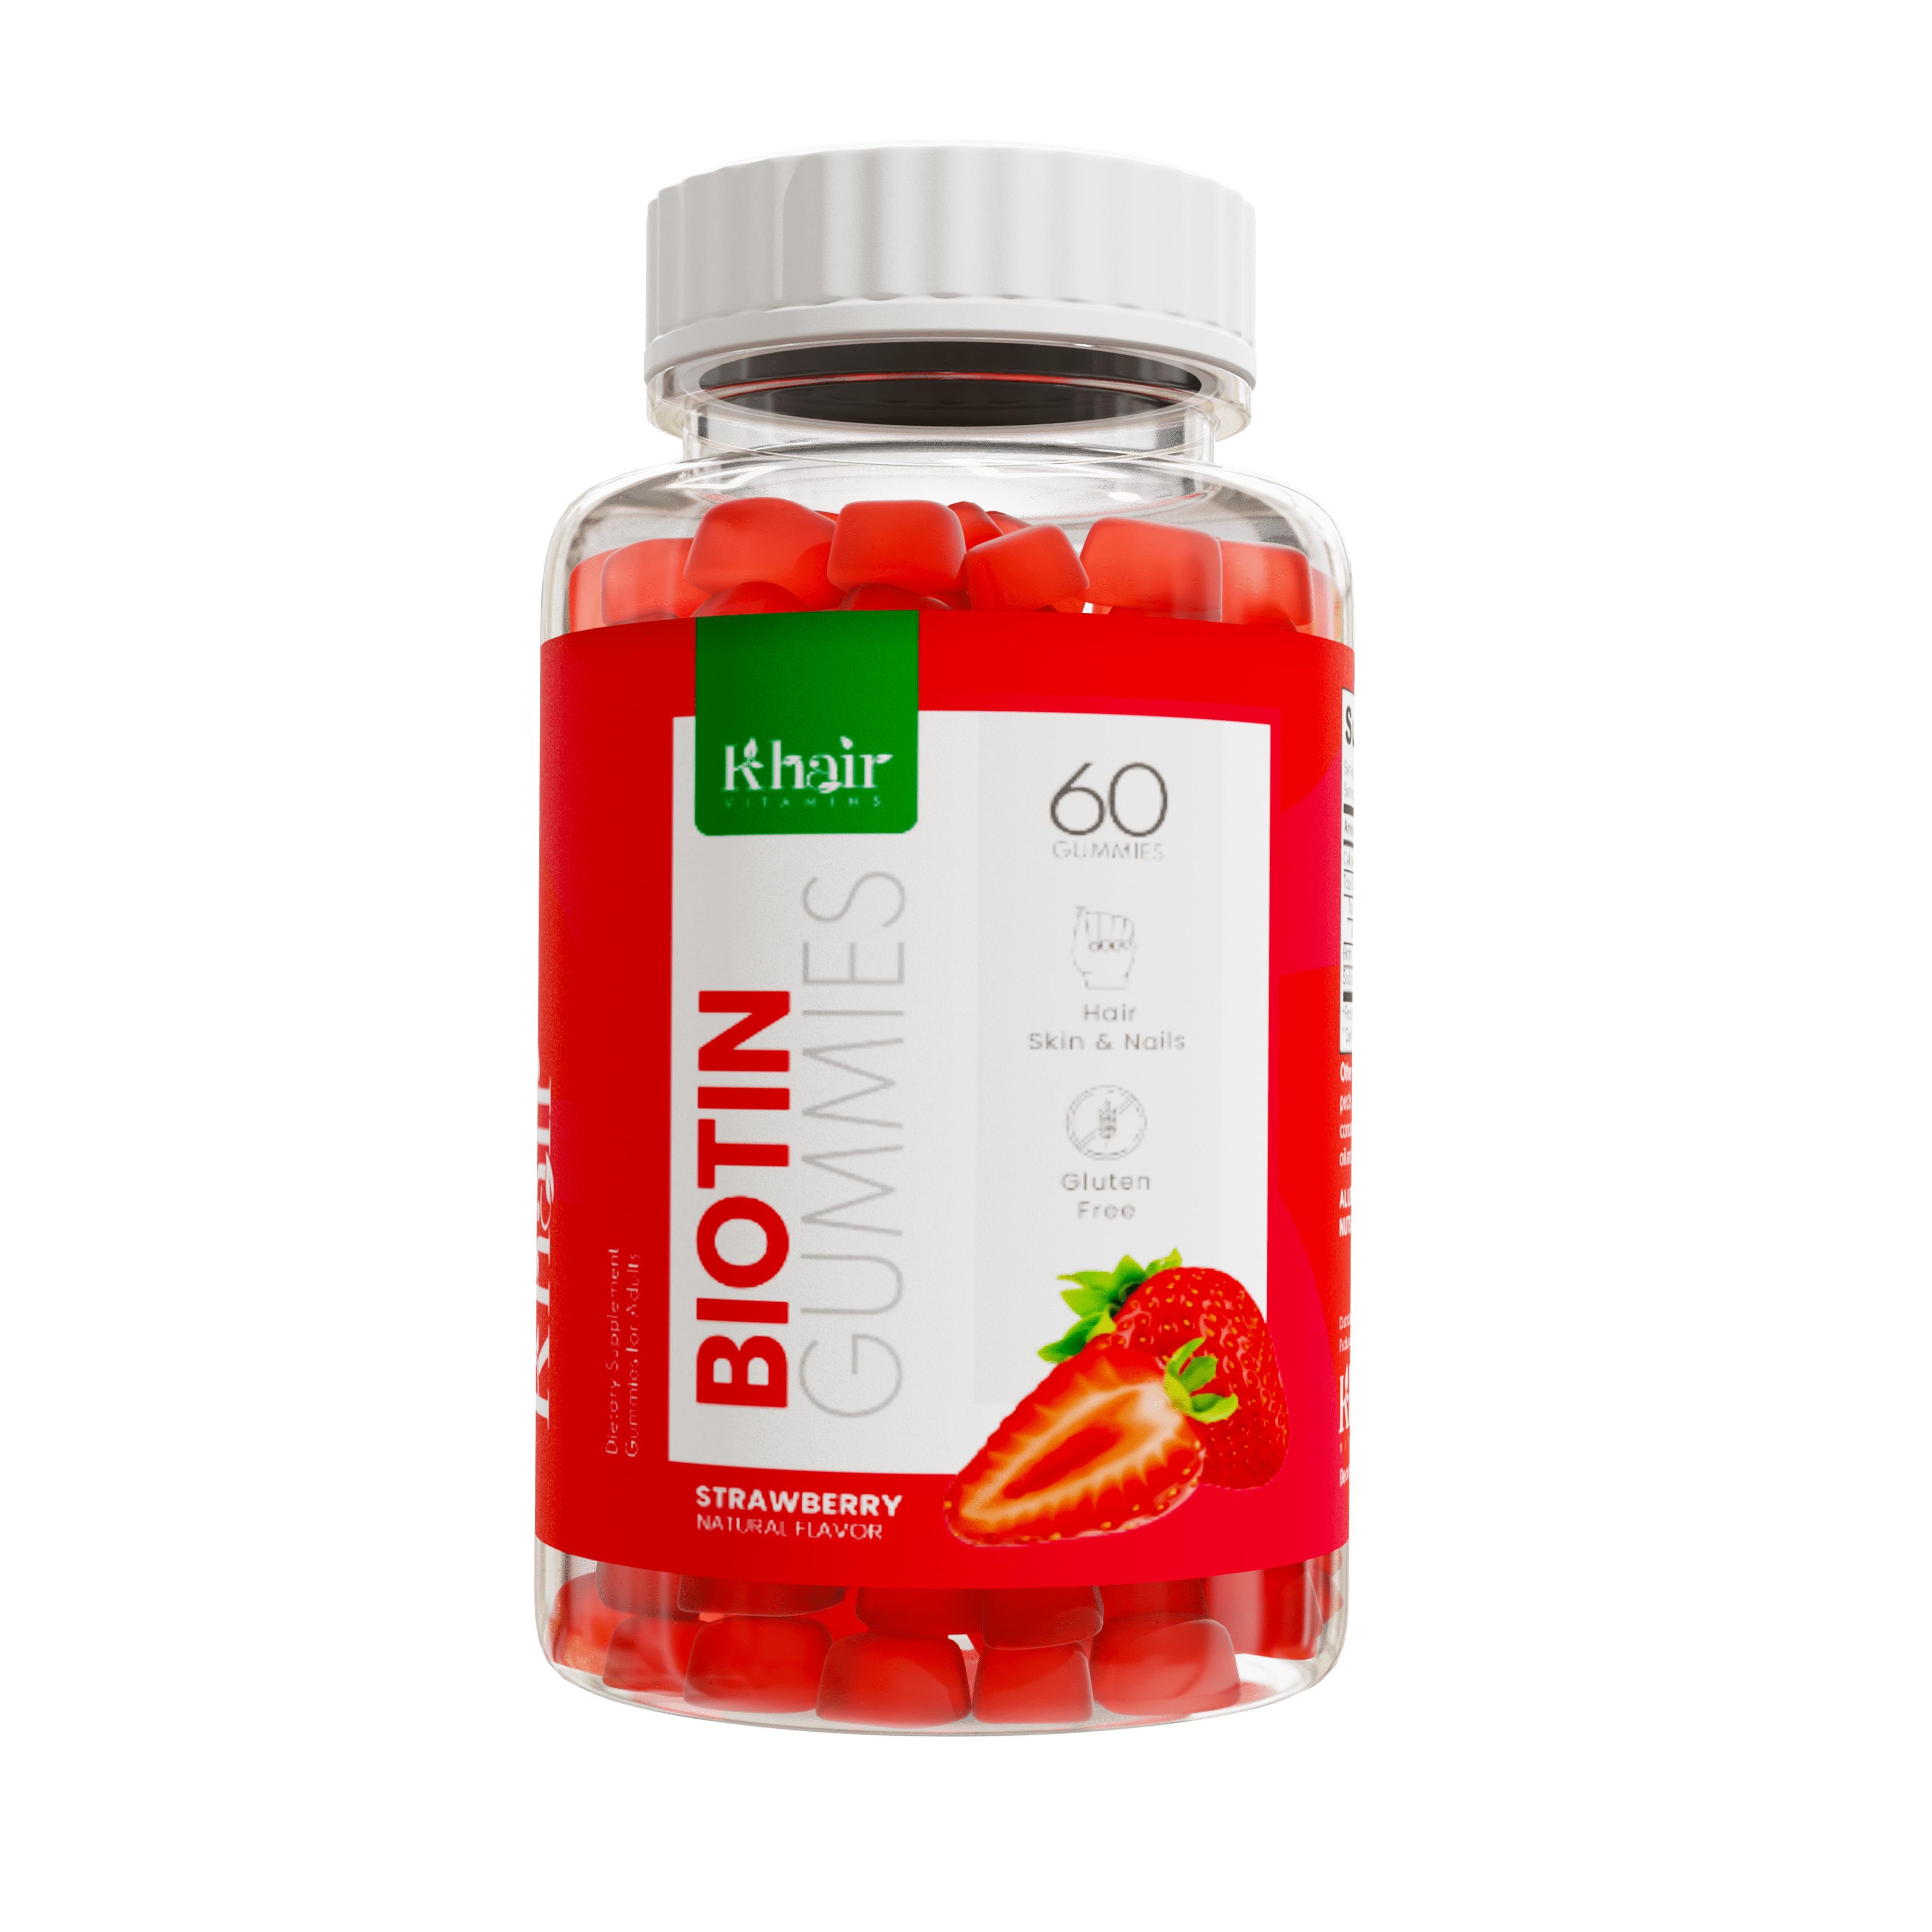 Biotin Gummies: A bottle of chewable supplements containing biotin, a vitamin that promotes healthy hair, skin, and nails.